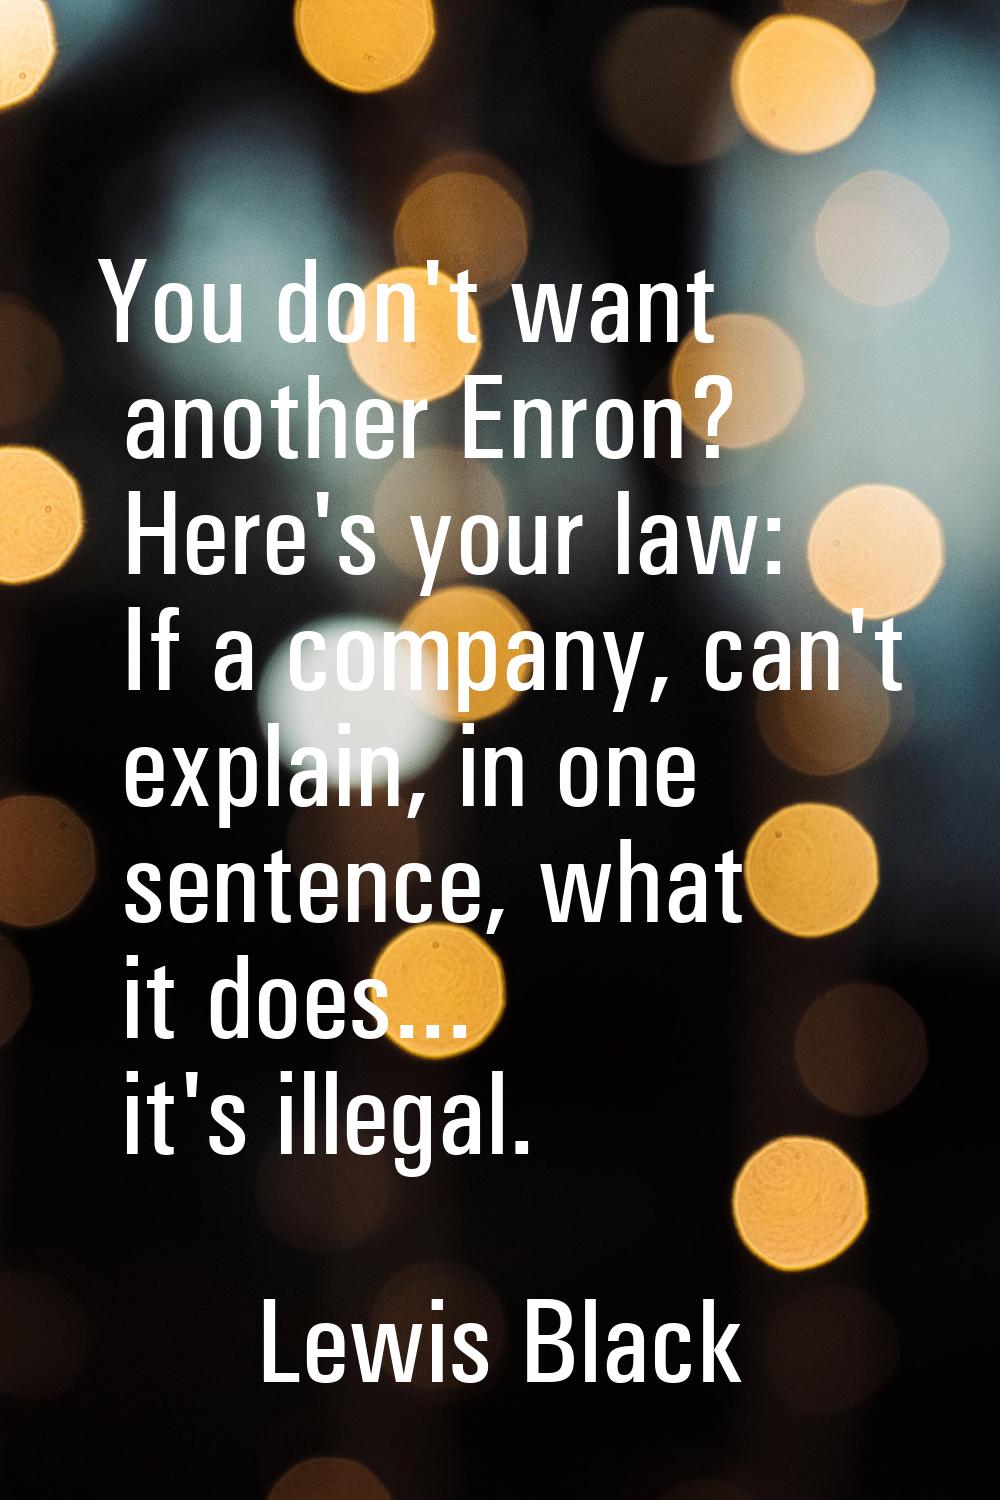 You don't want another Enron? Here's your law: If a company, can't explain, in one sentence, what i